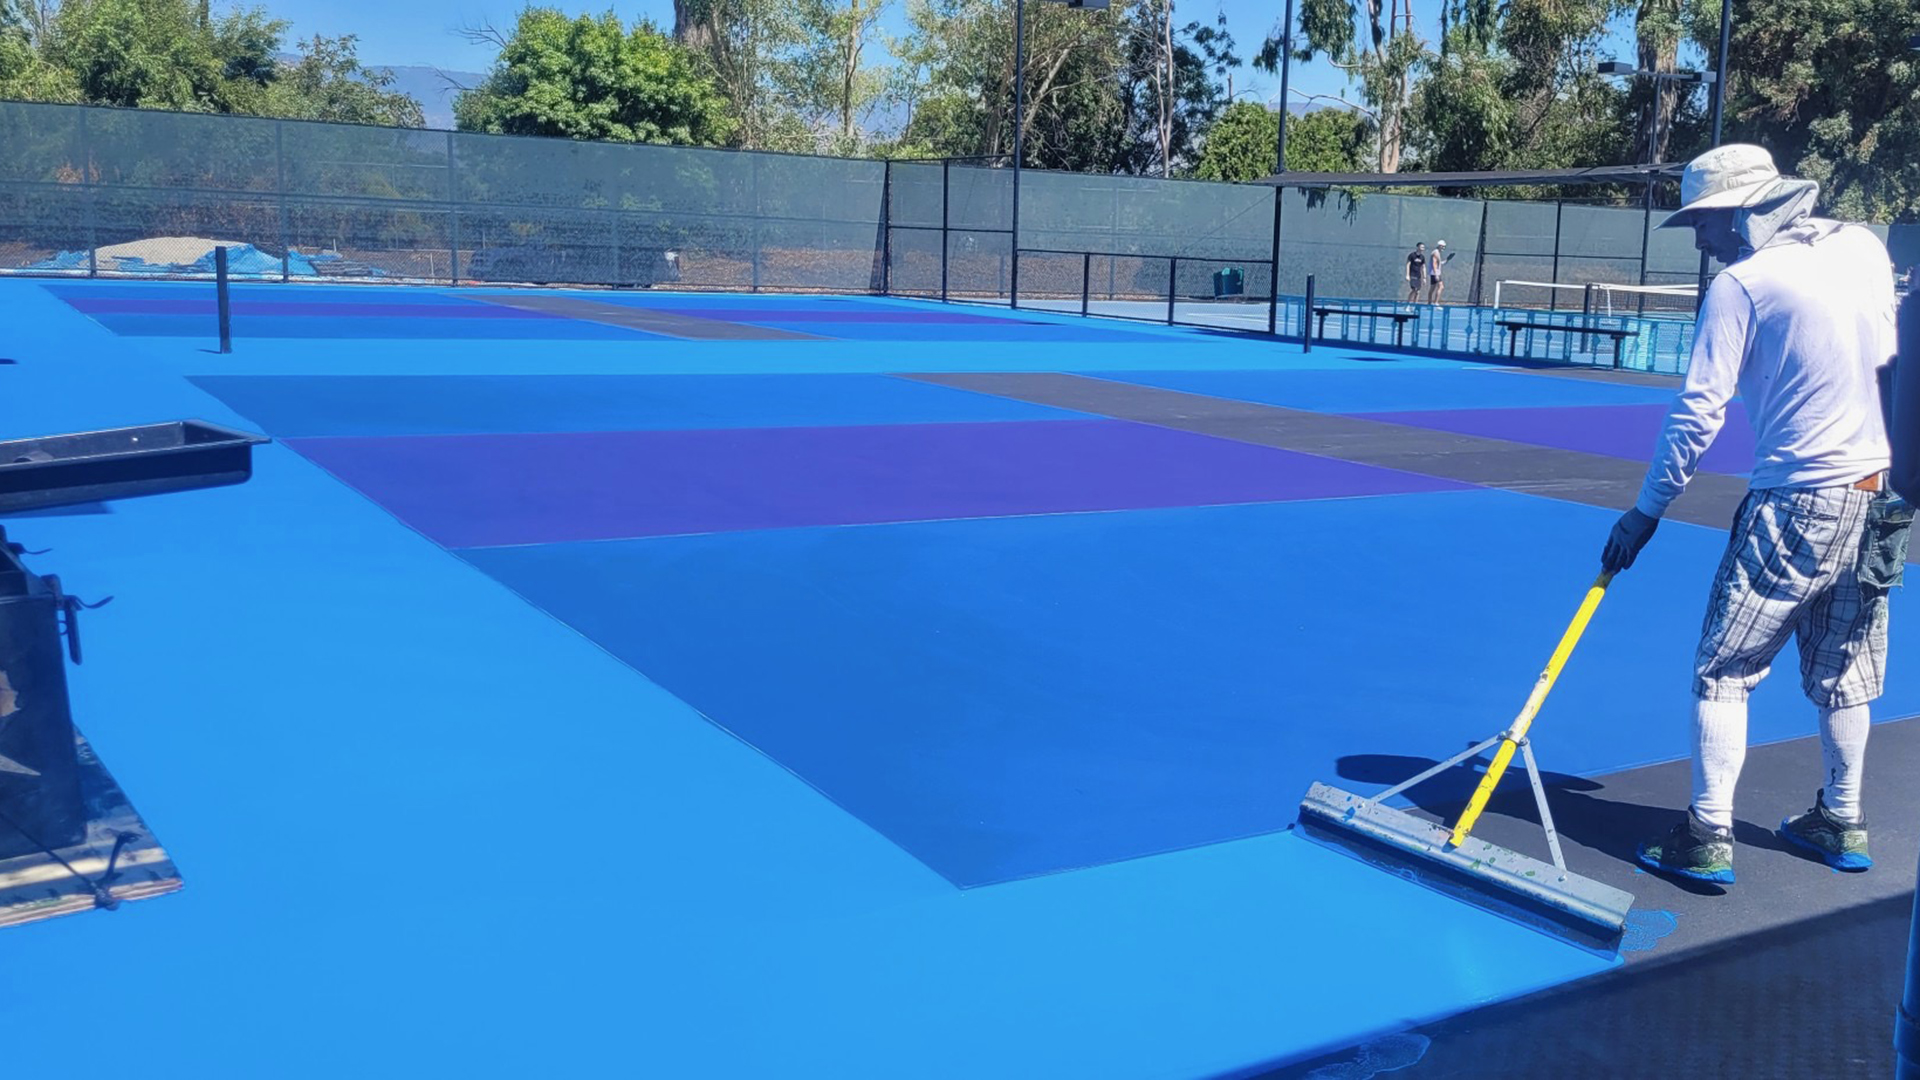 Courts resurfaced